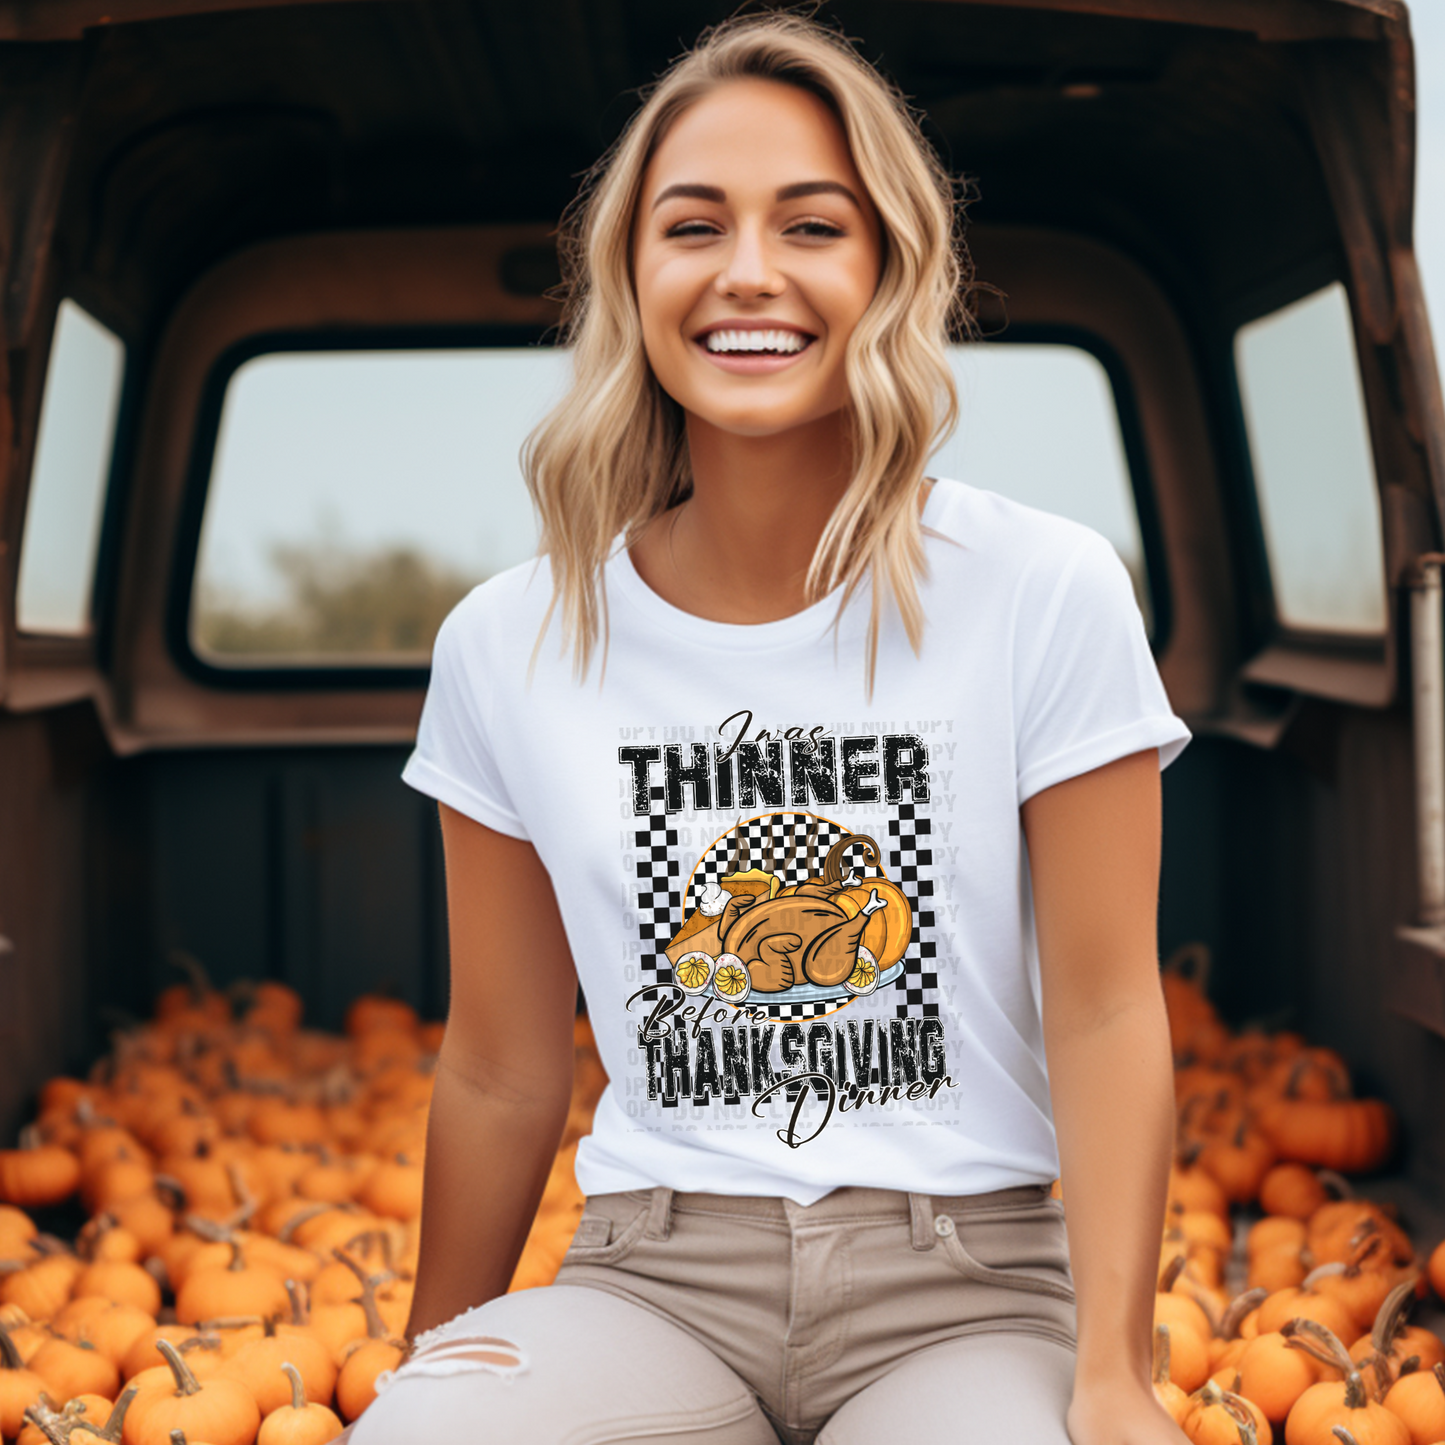 I Was Thinner Before Thanksgiving Dinner T-Shirt | Funny Thanksgiving Shirt | Fast Shipping | Super Soft Shirts for Women/Kid's